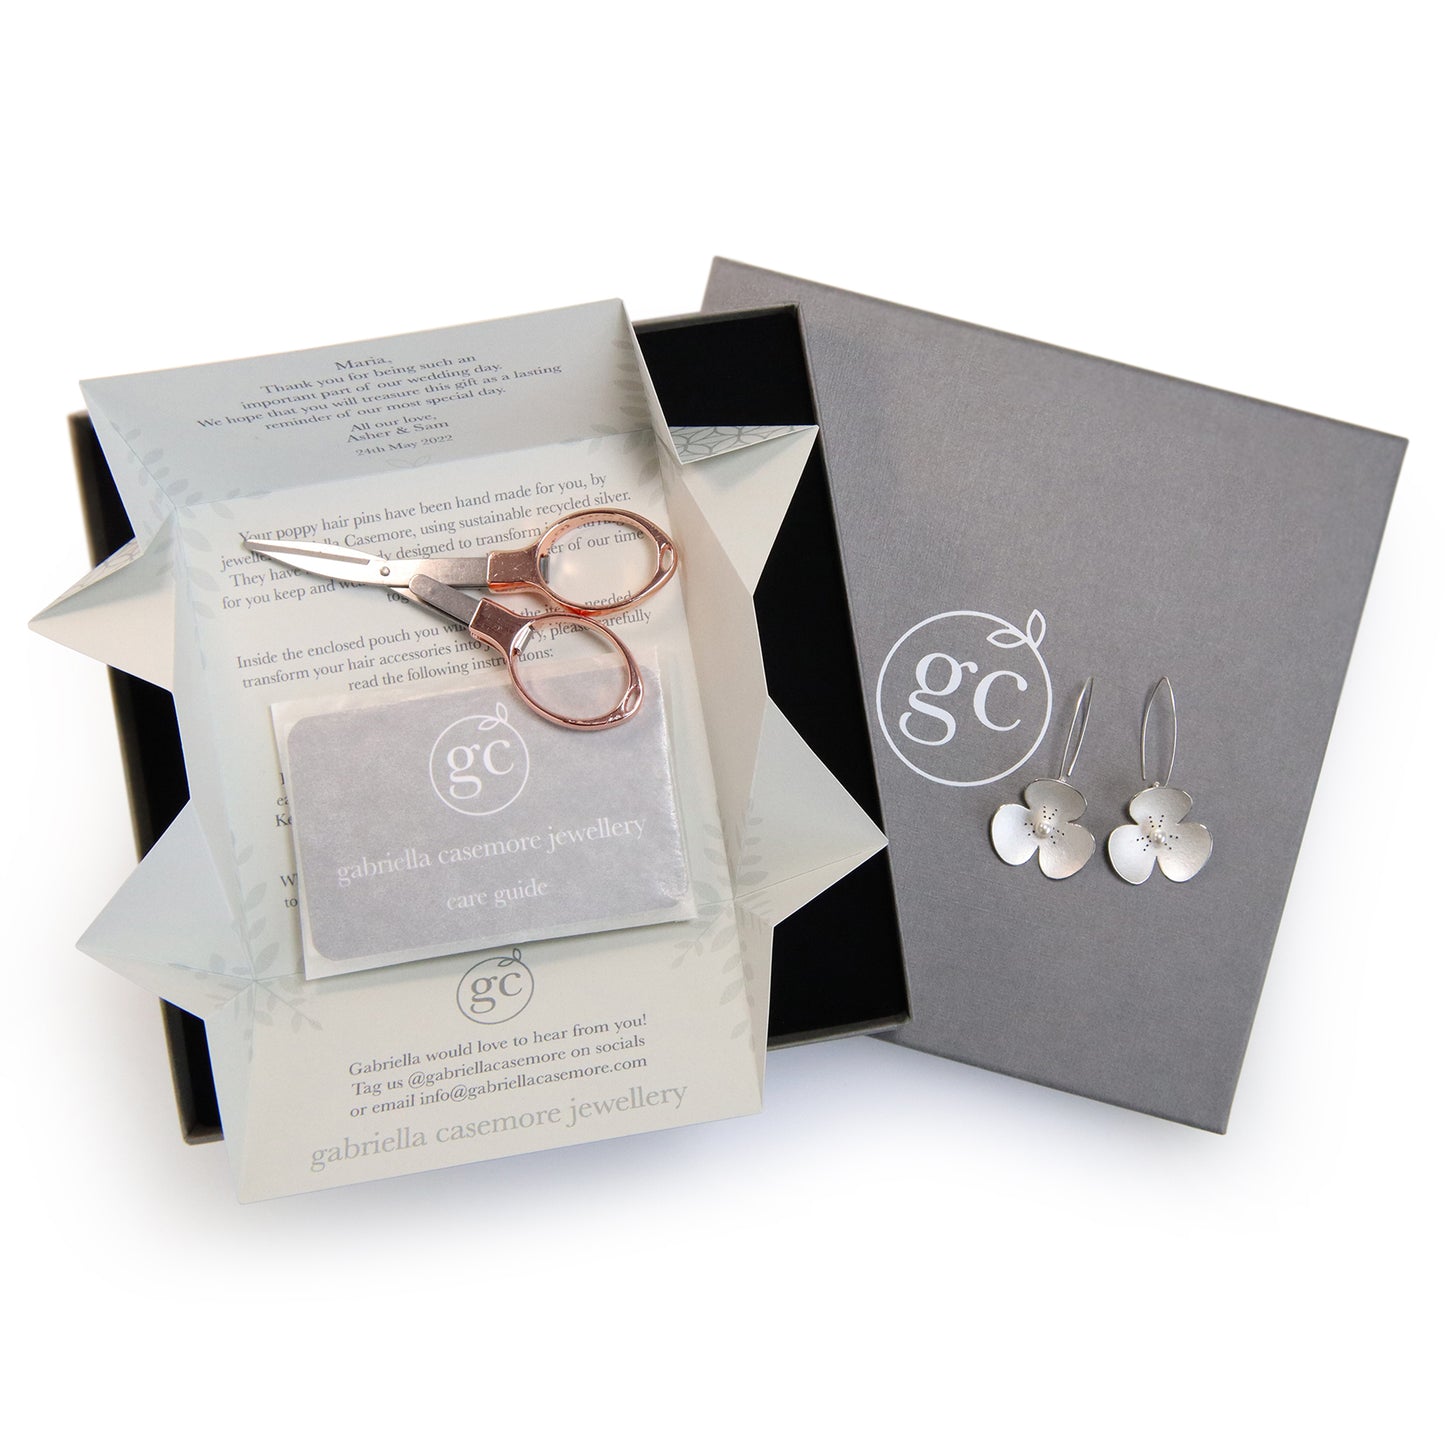 Two Silver and Pearl Poppy hairpins, which instantly convert into earrings